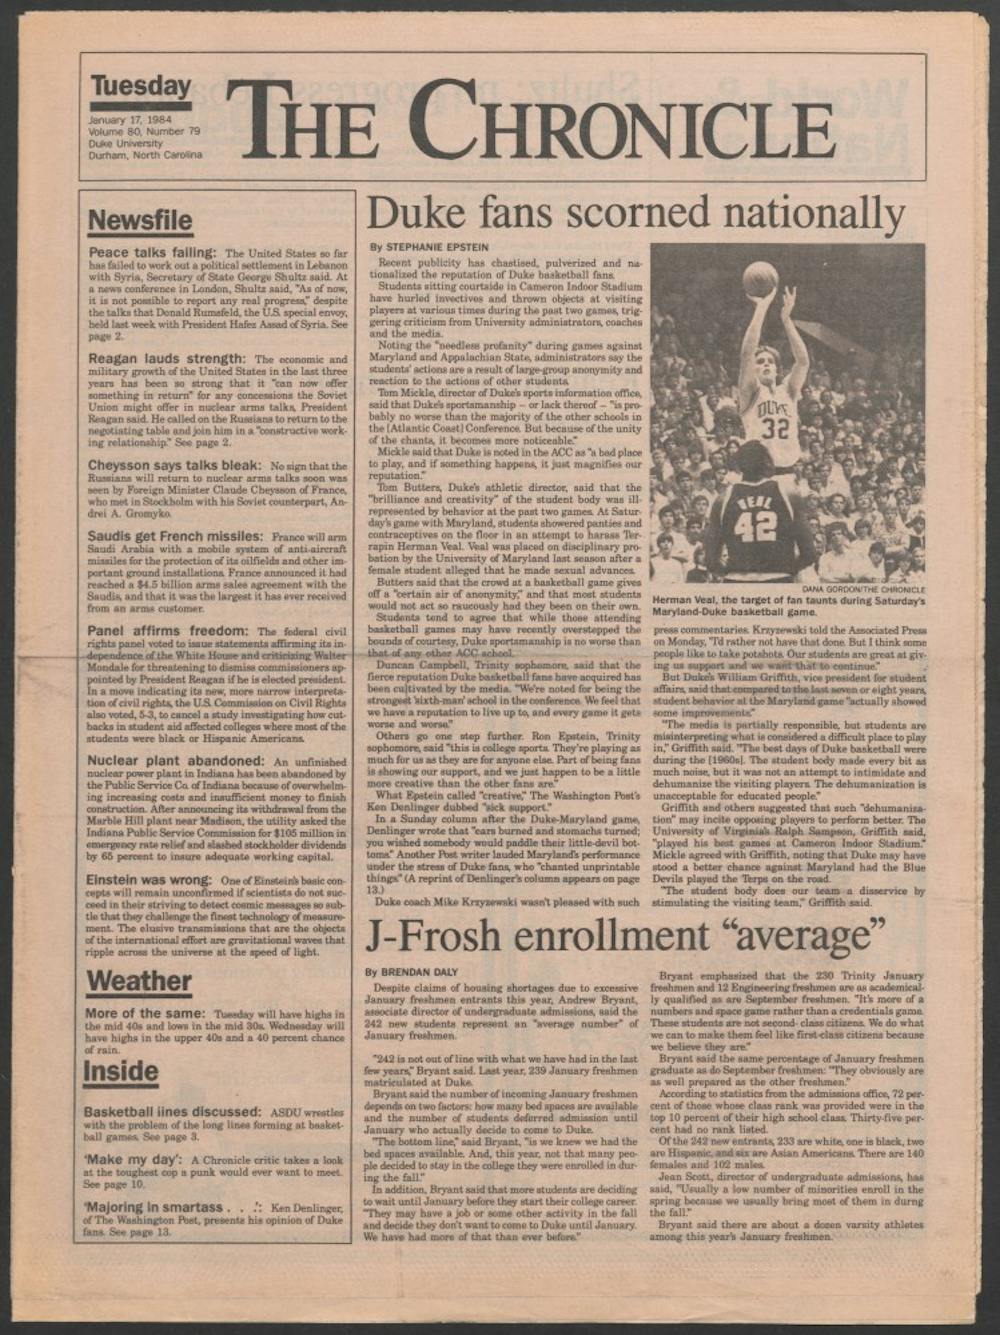 <p>The media did not take kindly to a particularly obscene taunt from the Cameron Crazies in 1984.</p>